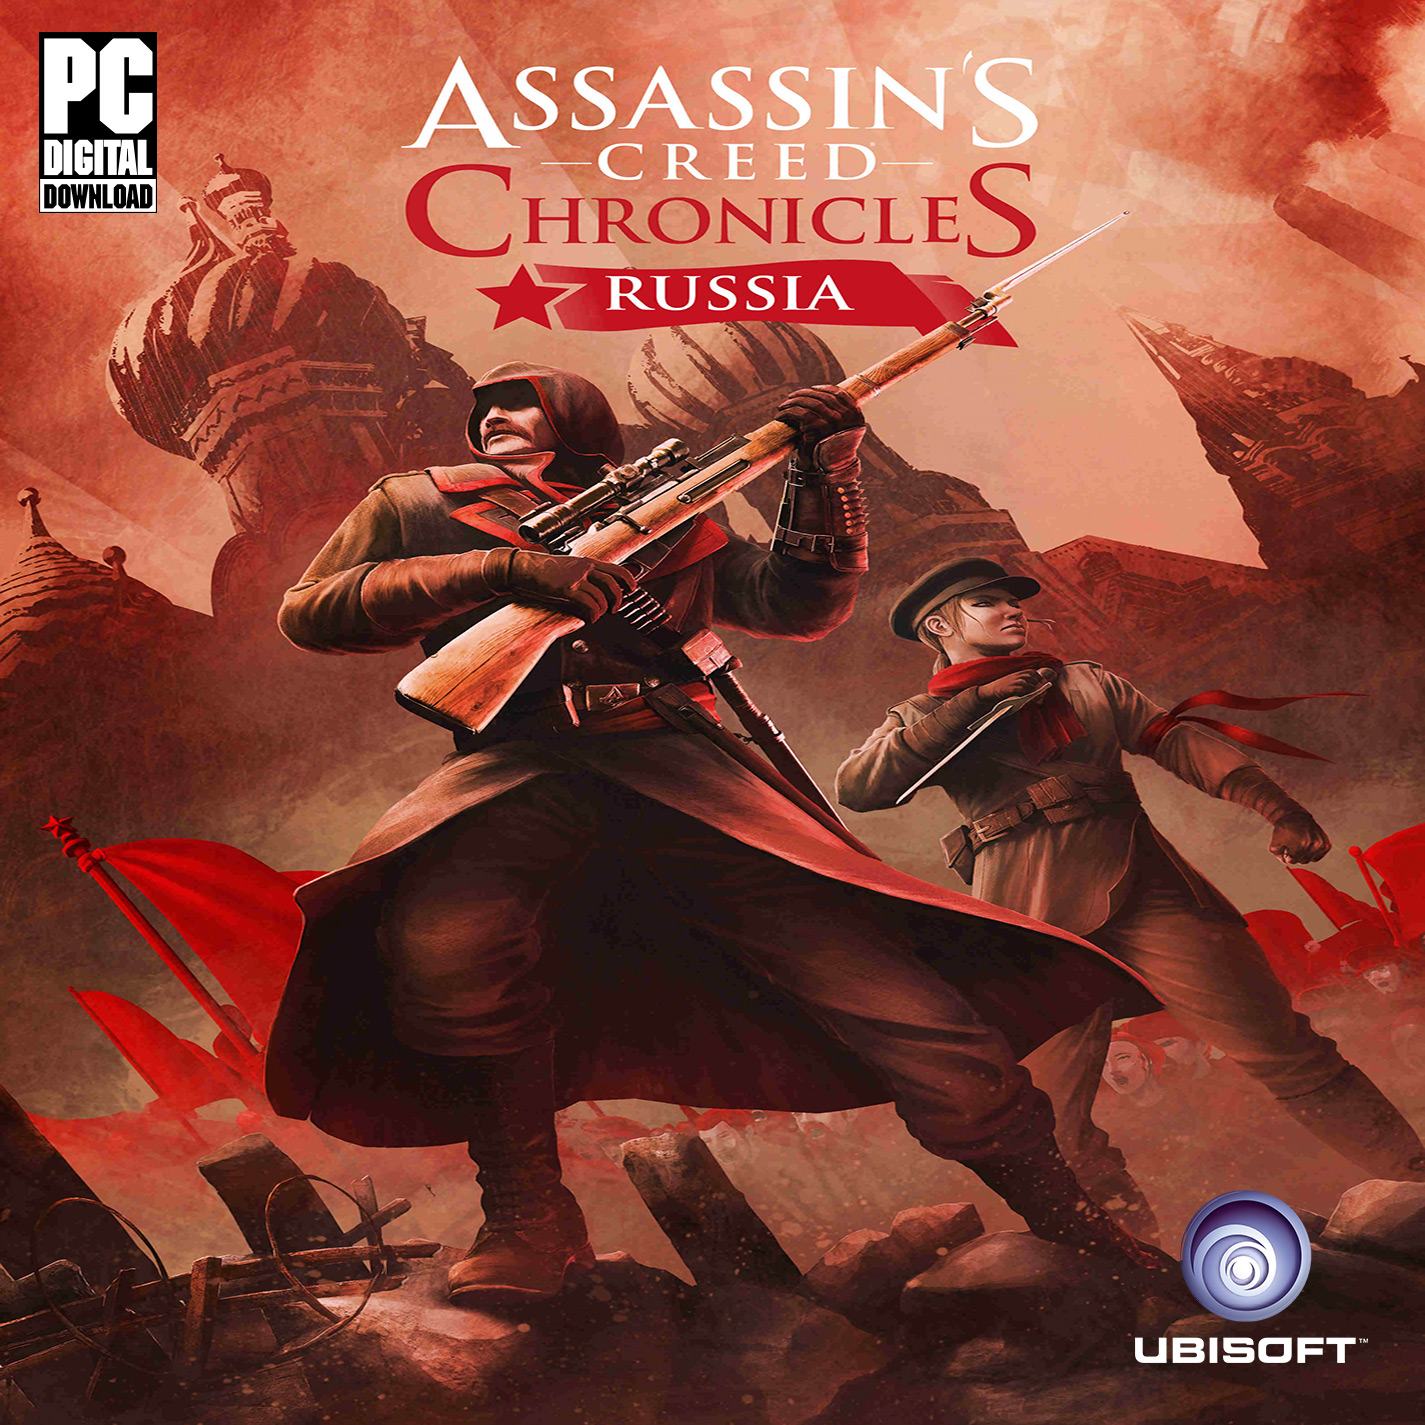 Assassin's Creed Chronicles: Russia - predn CD obal